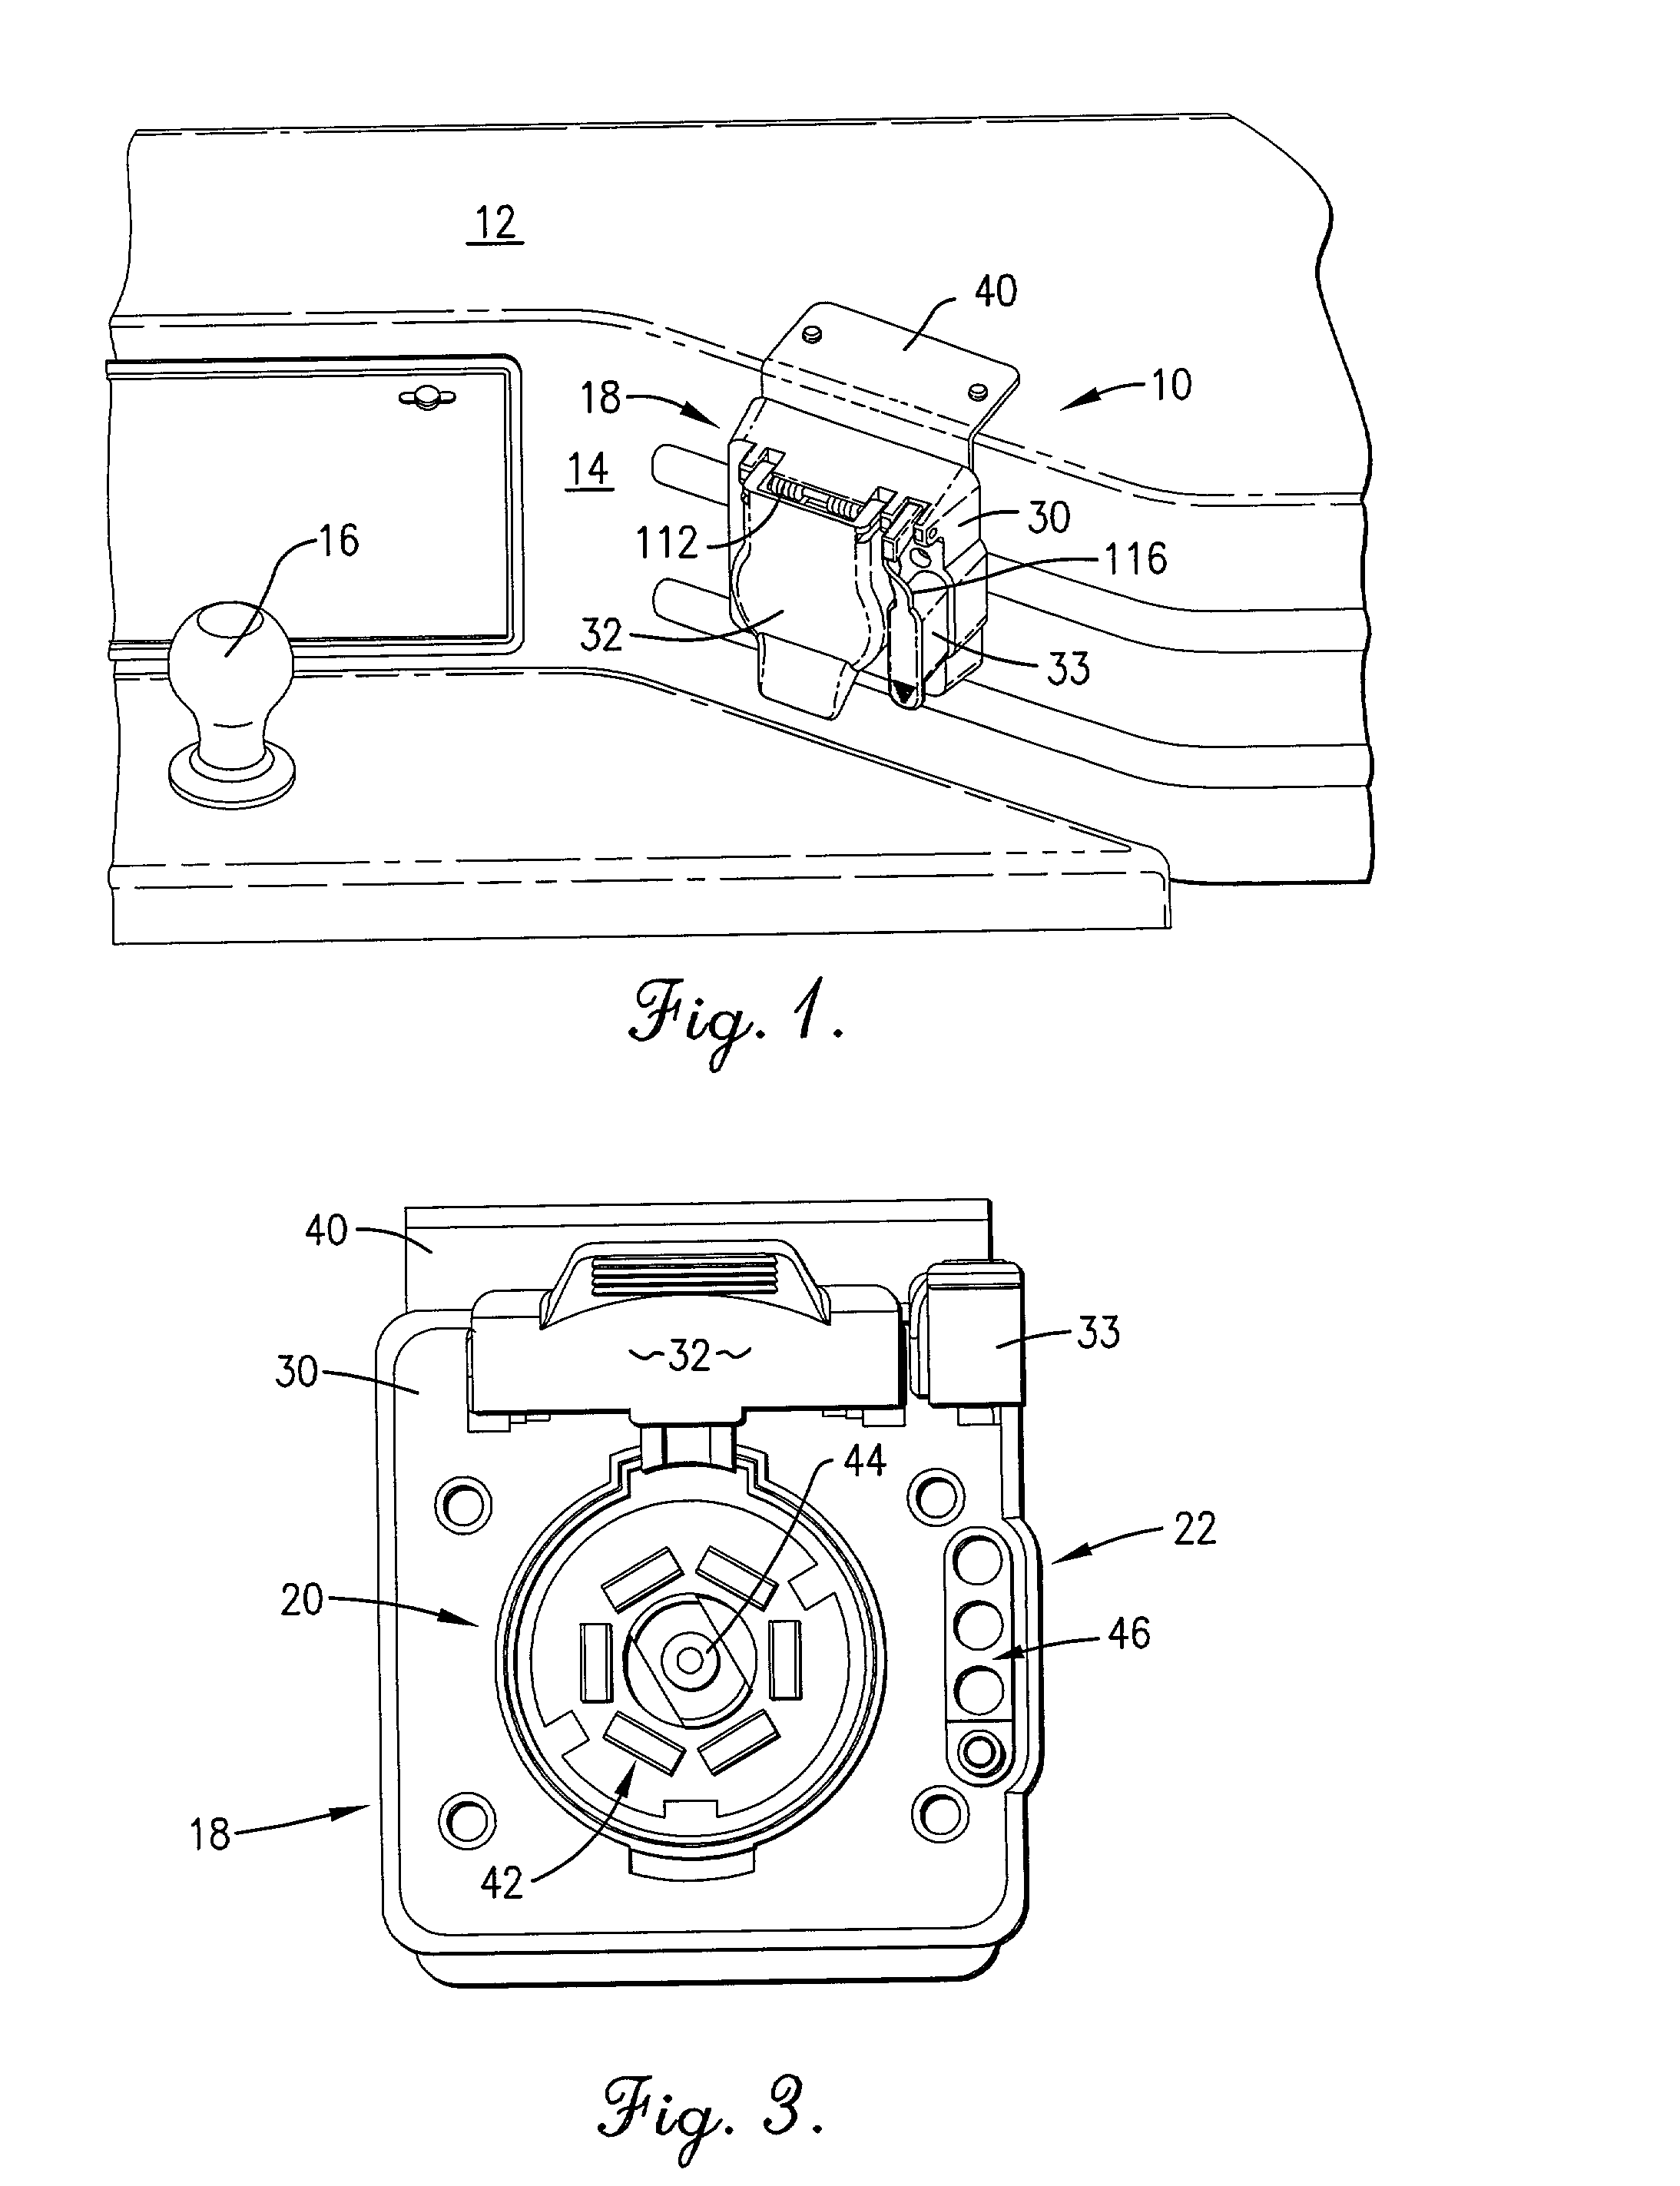 Electrical interface device for towing